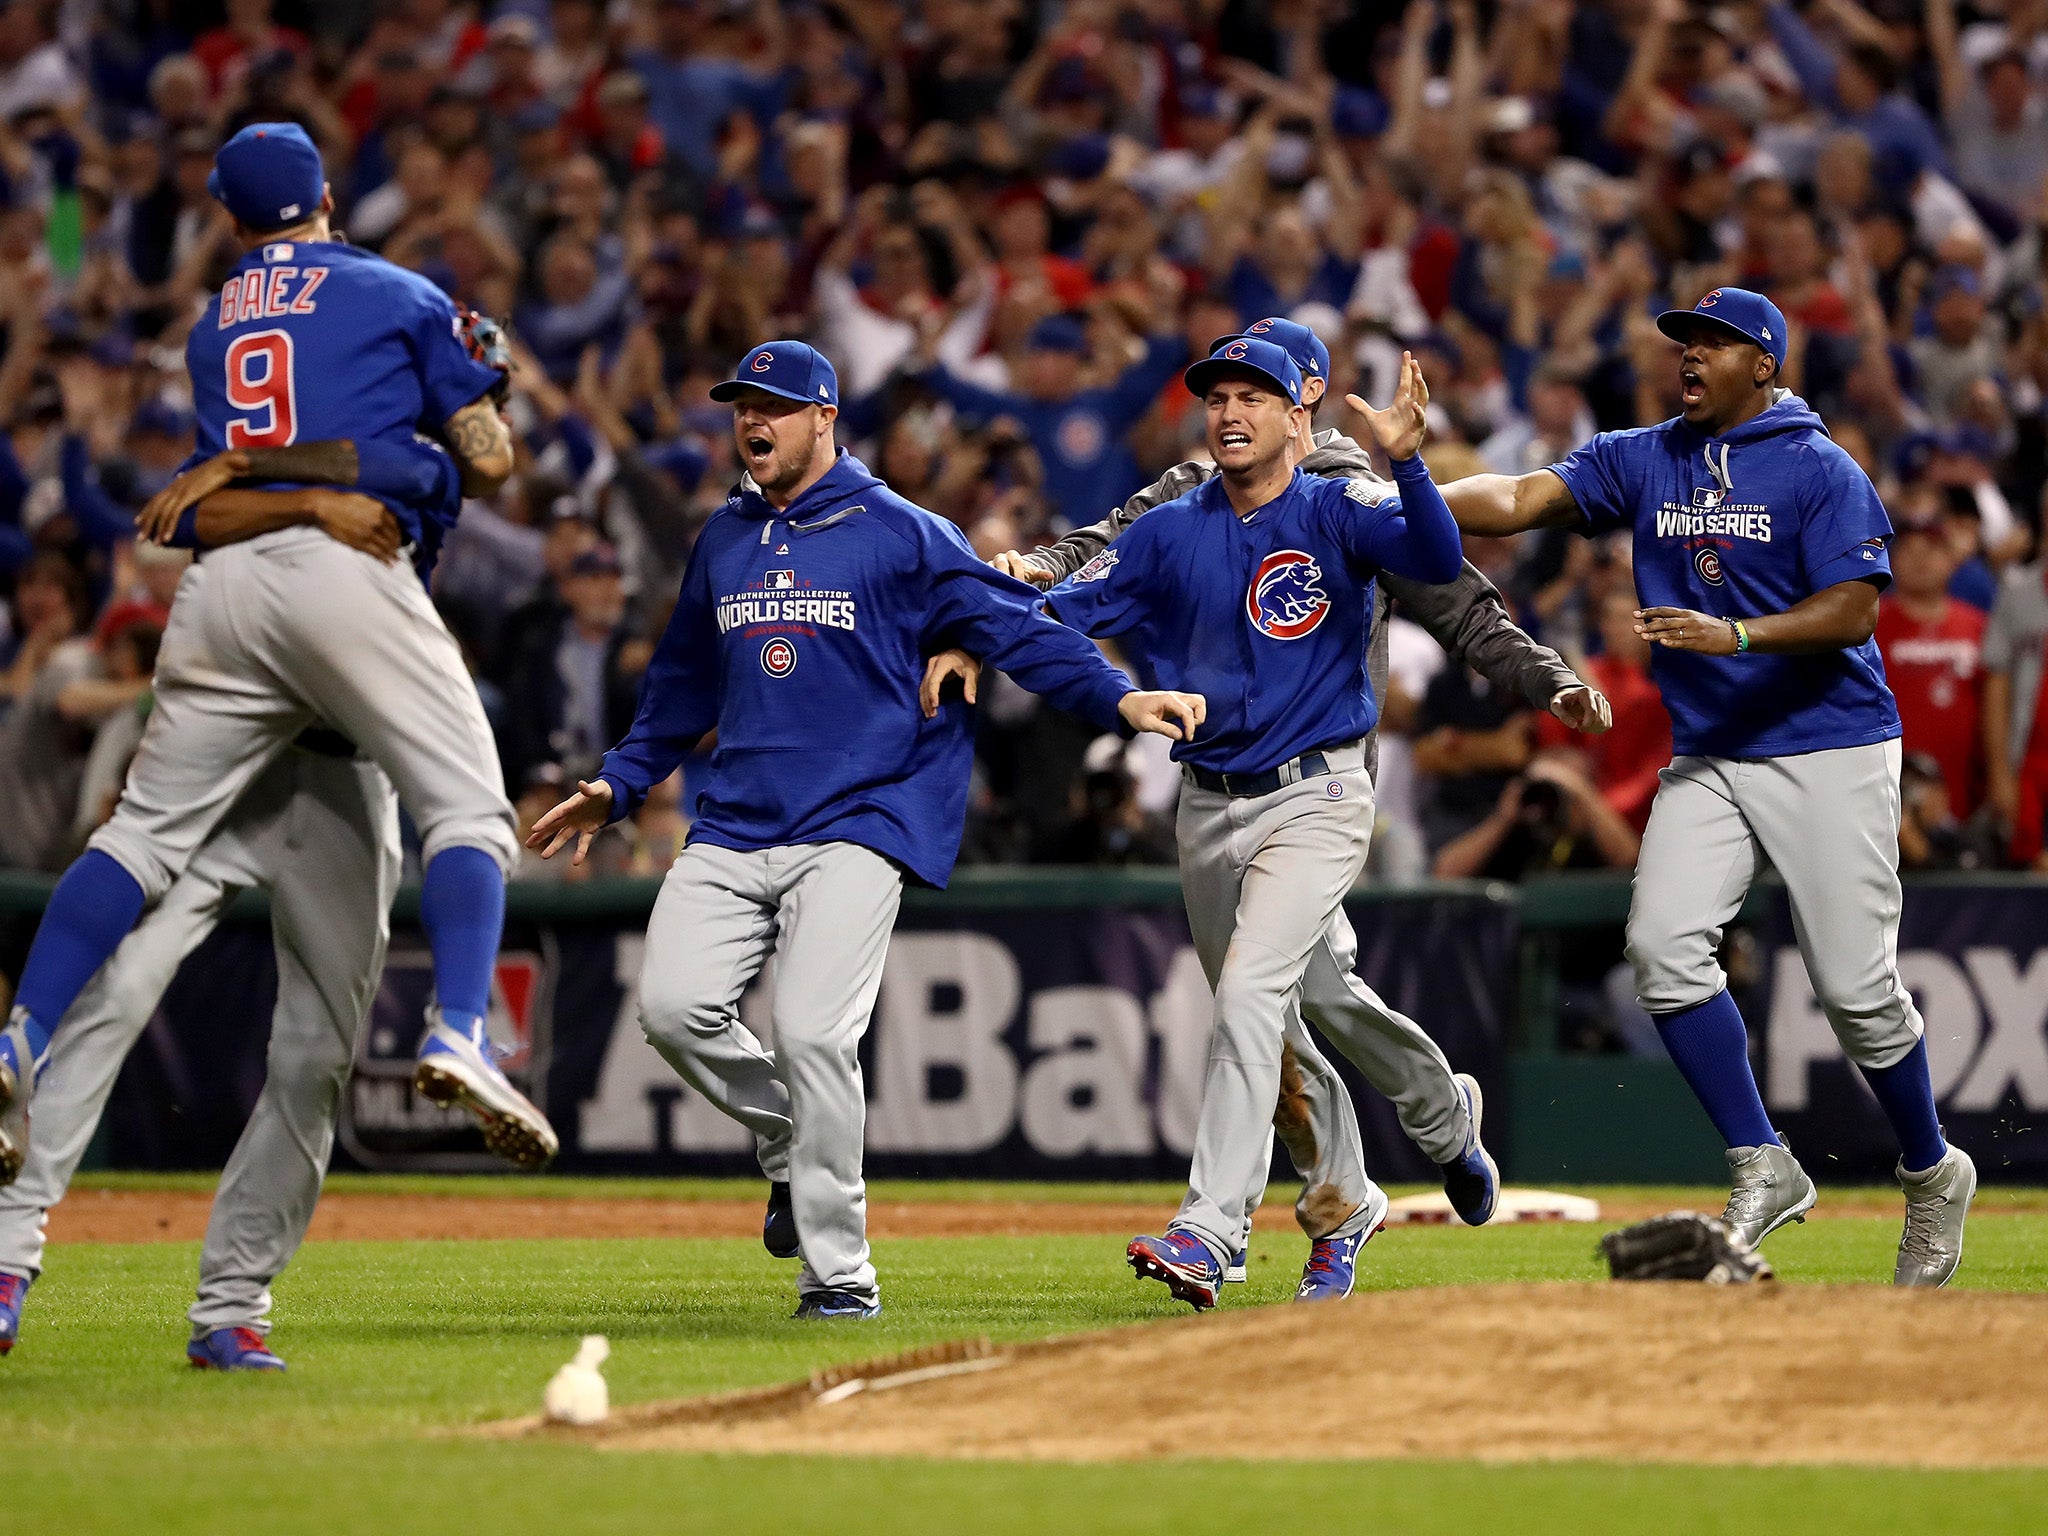 Lovable losers: The agonizing history of the Chicago Cubs